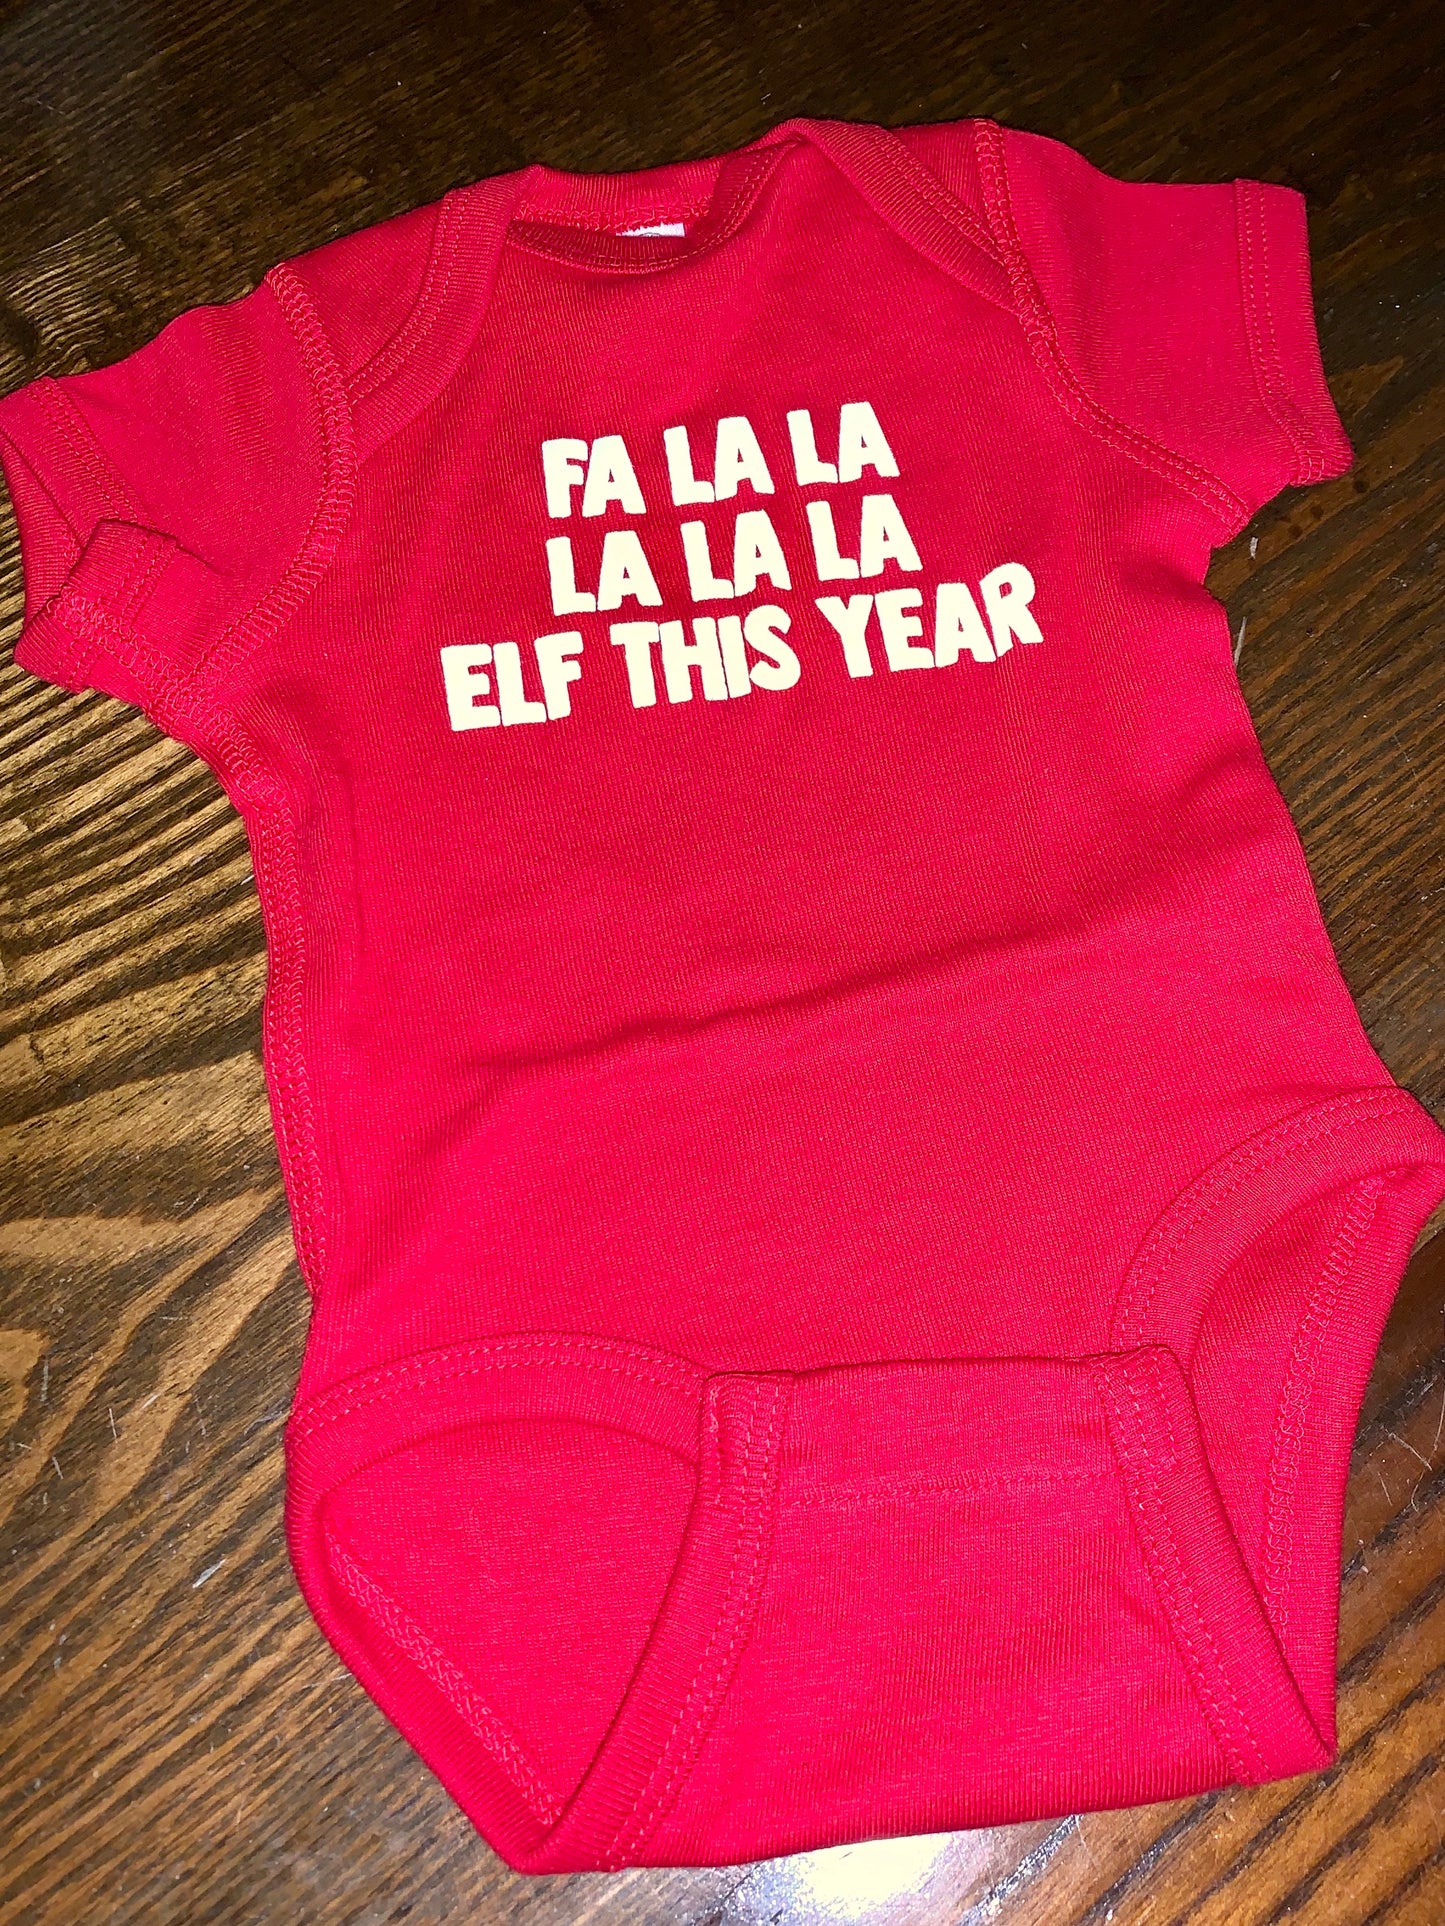 Elf This Year Baby Onesie in Red